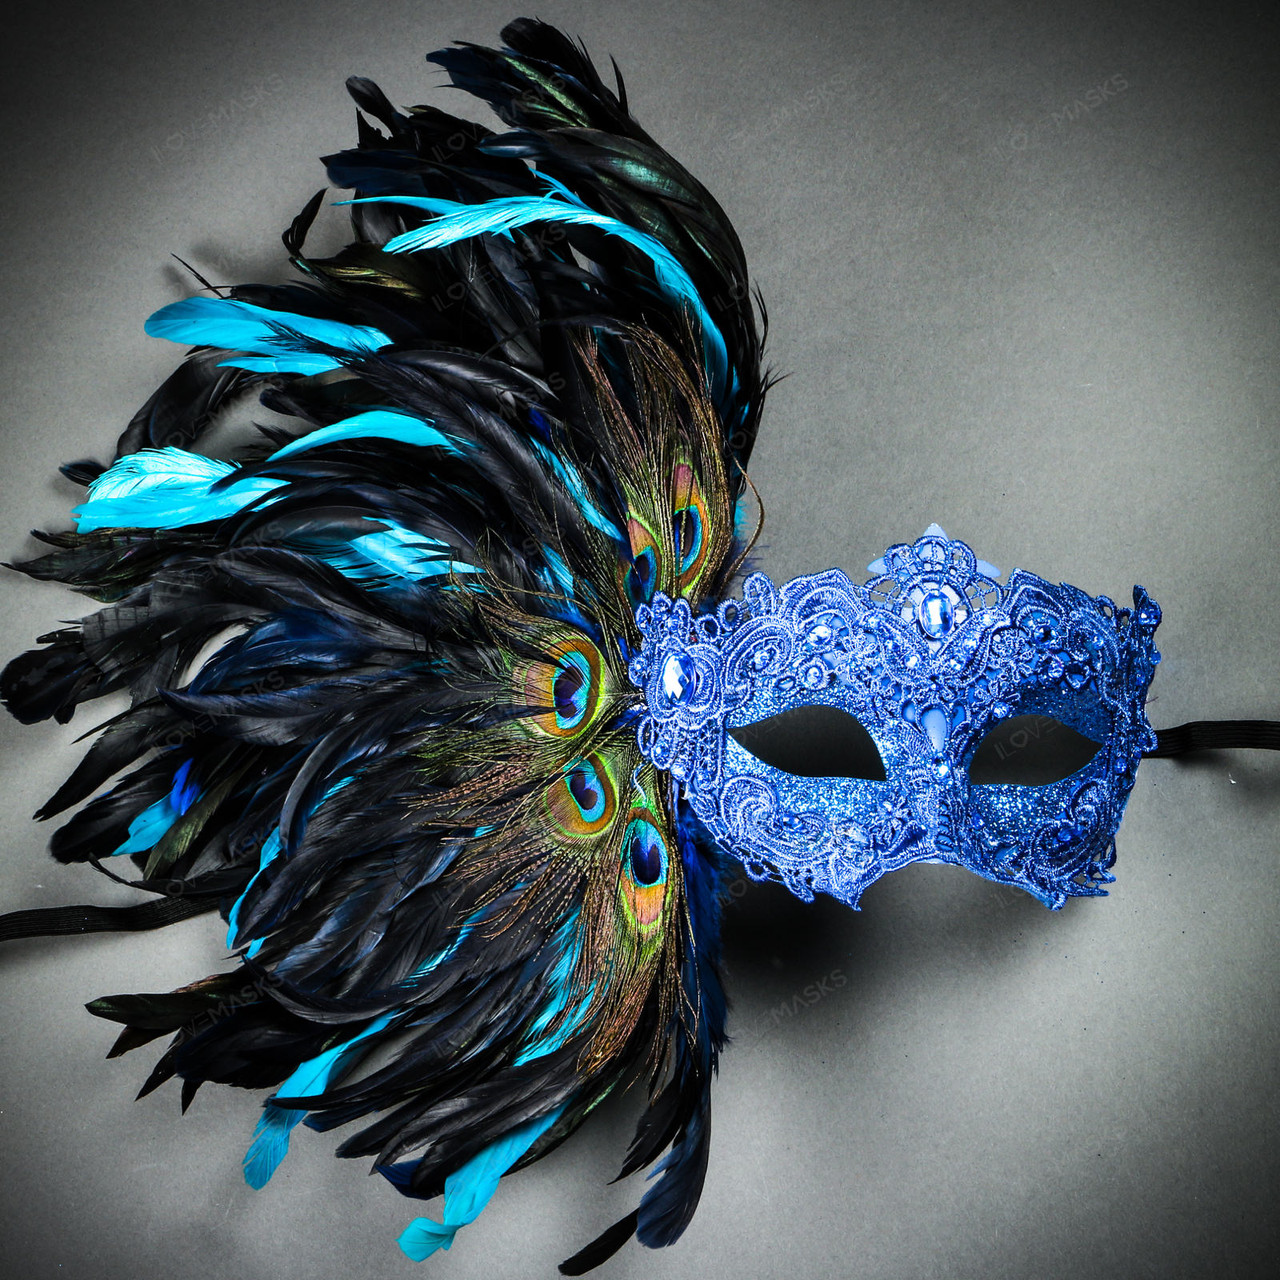 Feather Masquerade Masks Face Mask Feathers Masquerade Venetian Party Mask Red - Women's Masquerade Masks